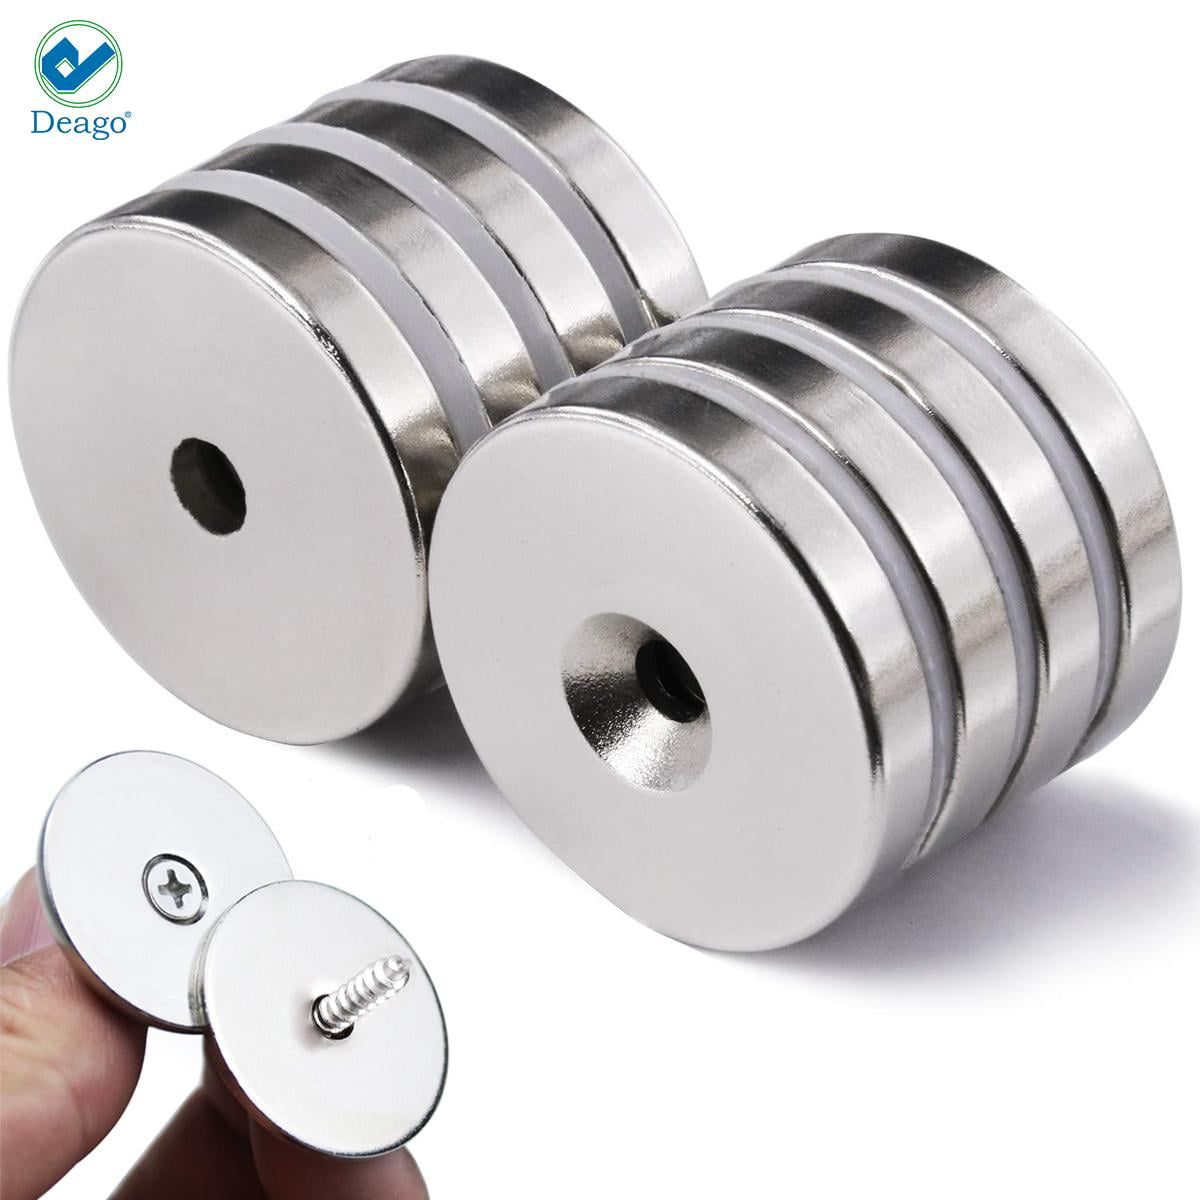 10-25mm Countersunk Ring Round Rare Earth Neodymium Disc Strong Hole Magnets N50 